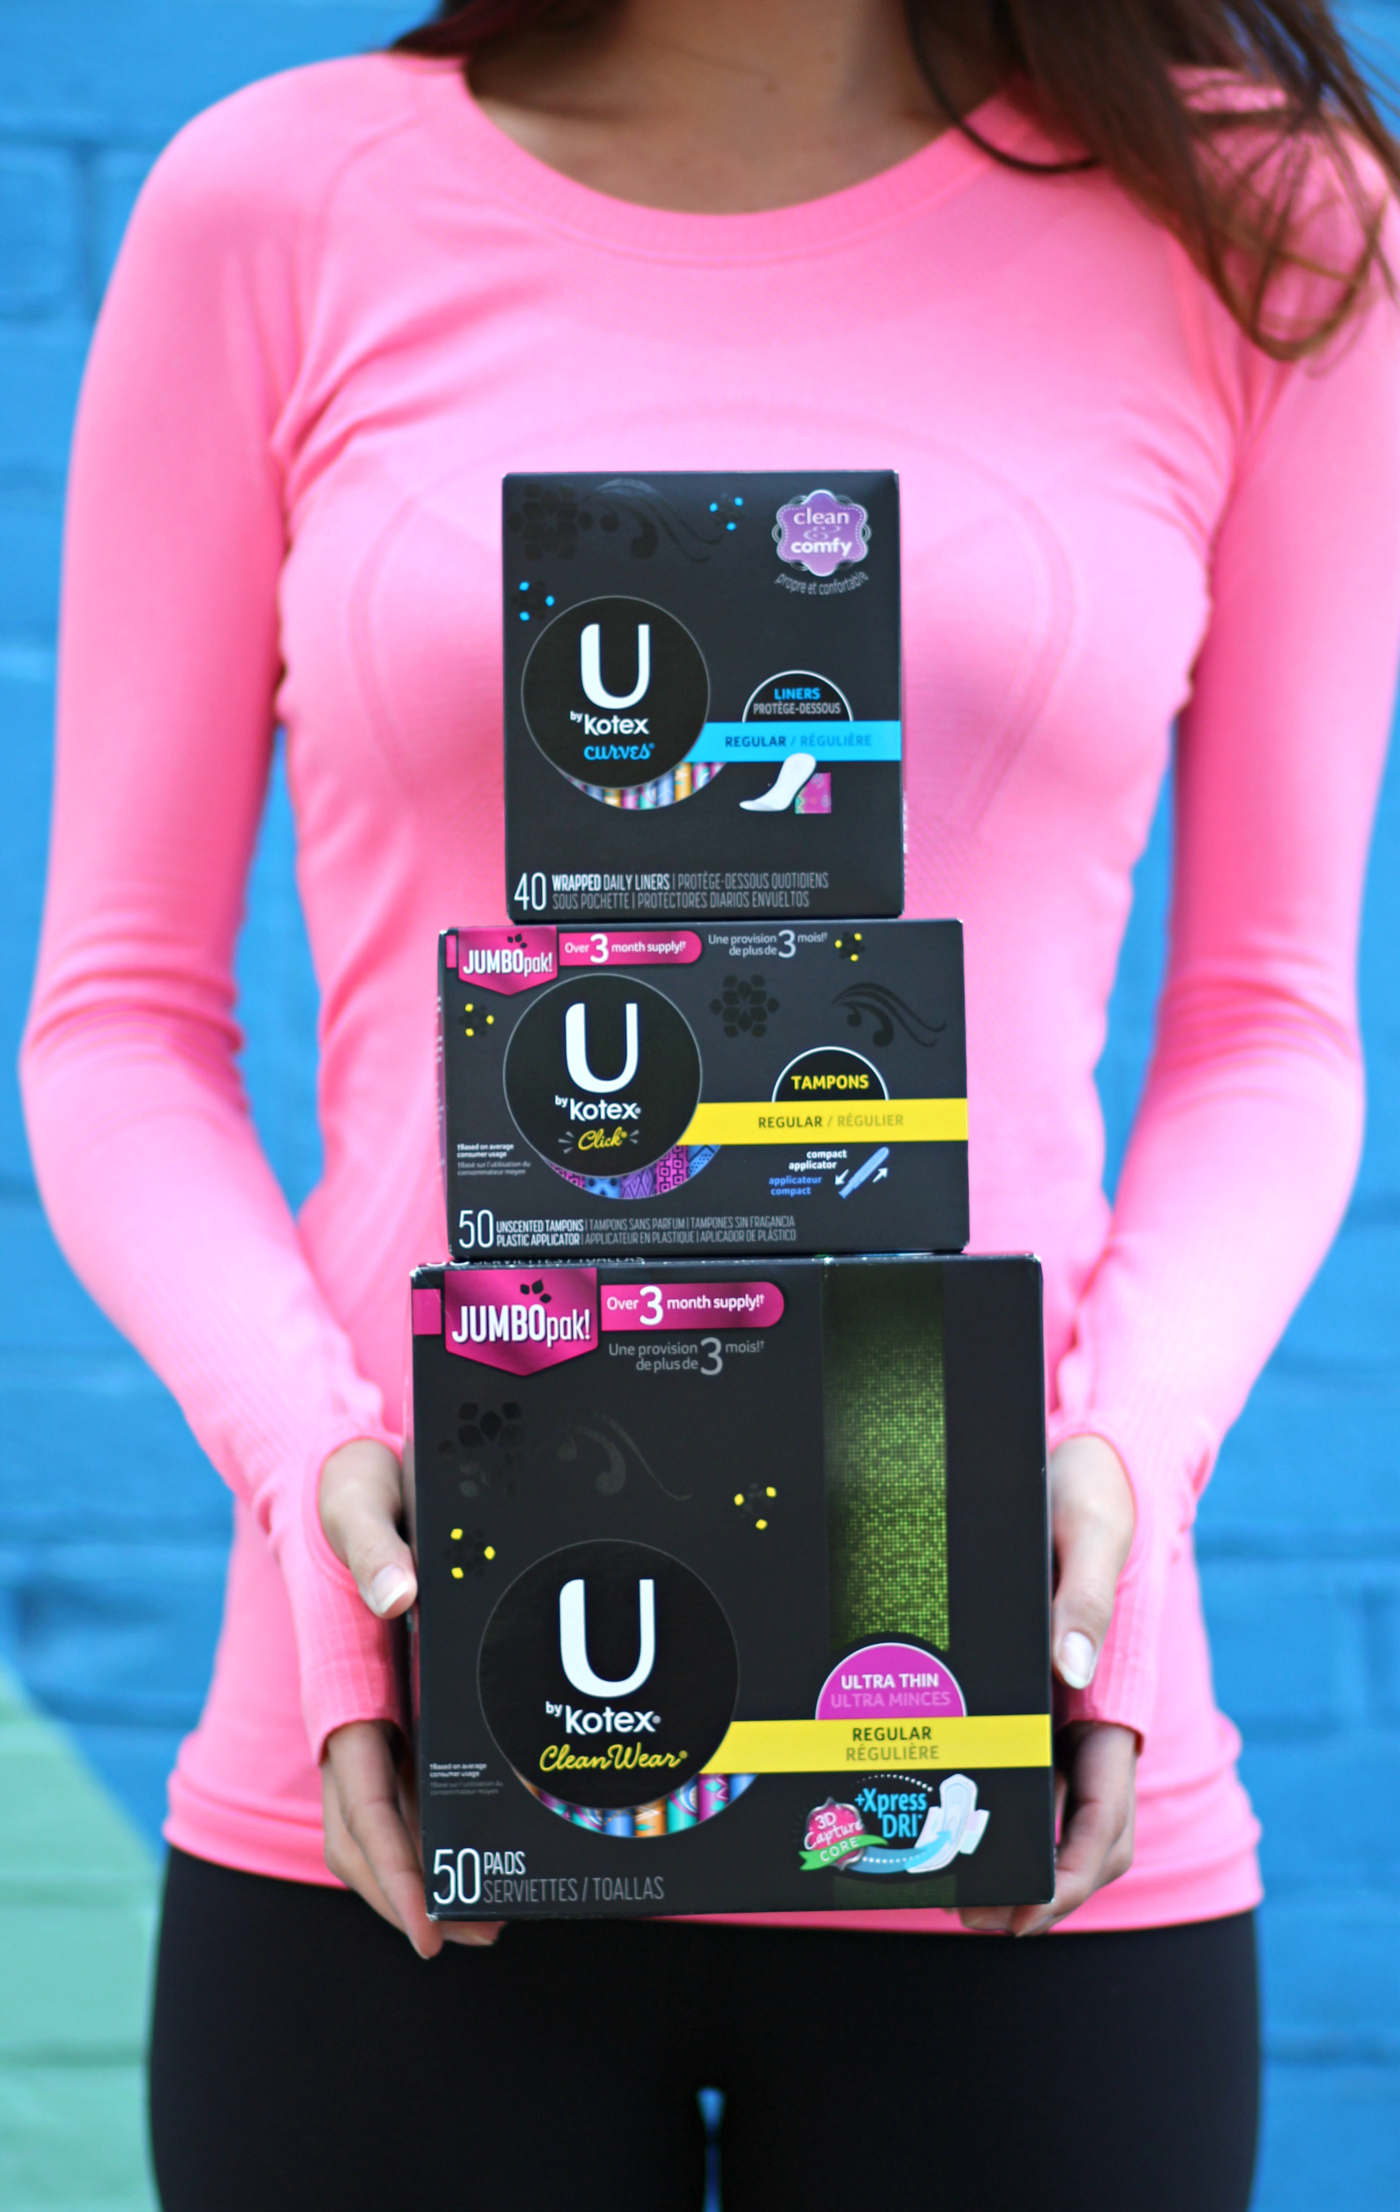 U by Kotex teamed up with Holly Sanchez to launch the Power to the Period Donation Drive in partnership with DoSomething.org to help provide period products to people experiencing homelessness.